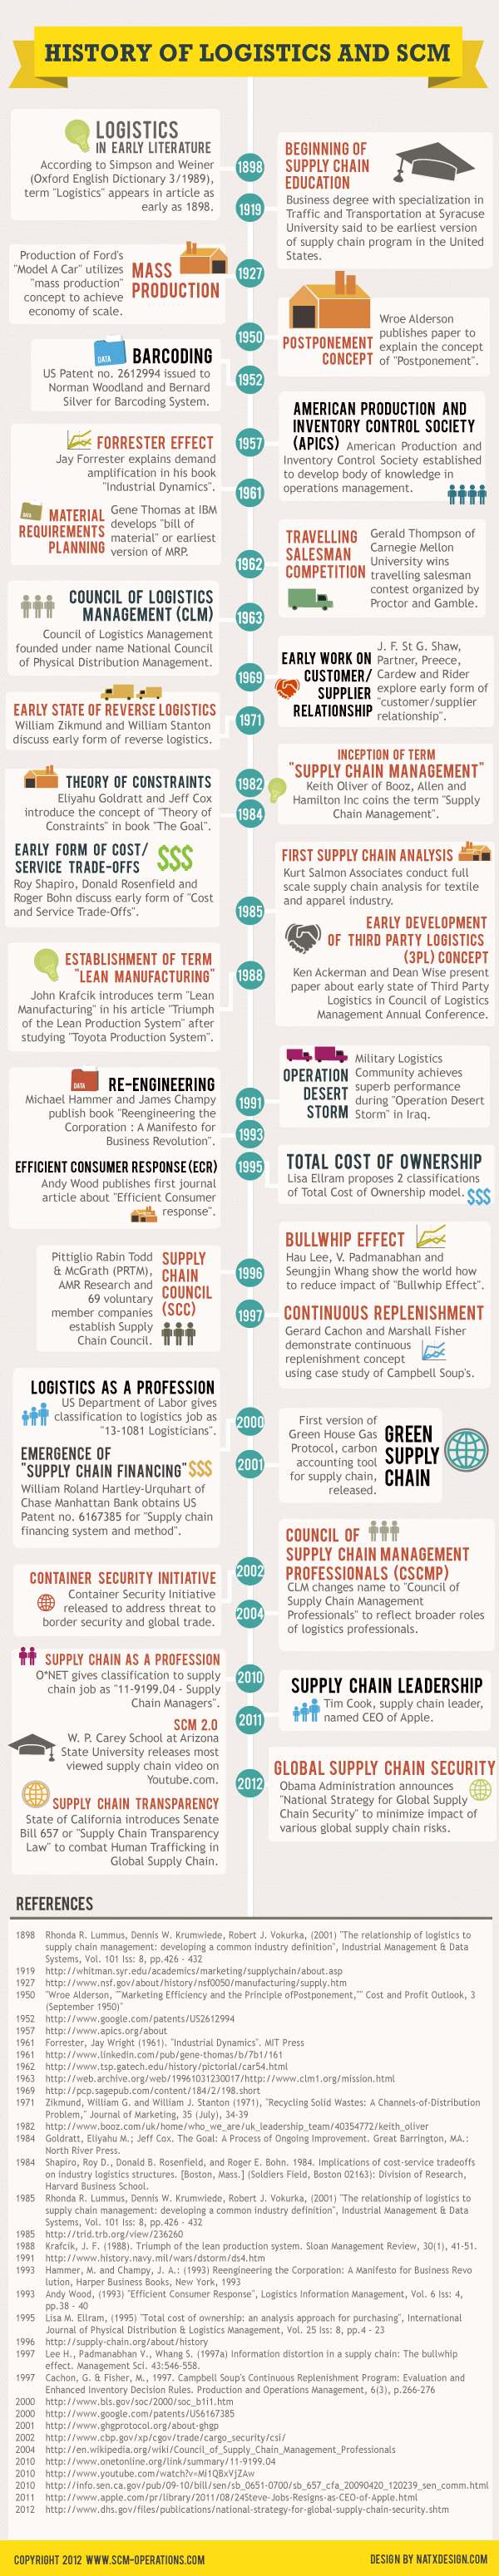 history-of-logistics-and-supply-chain-management